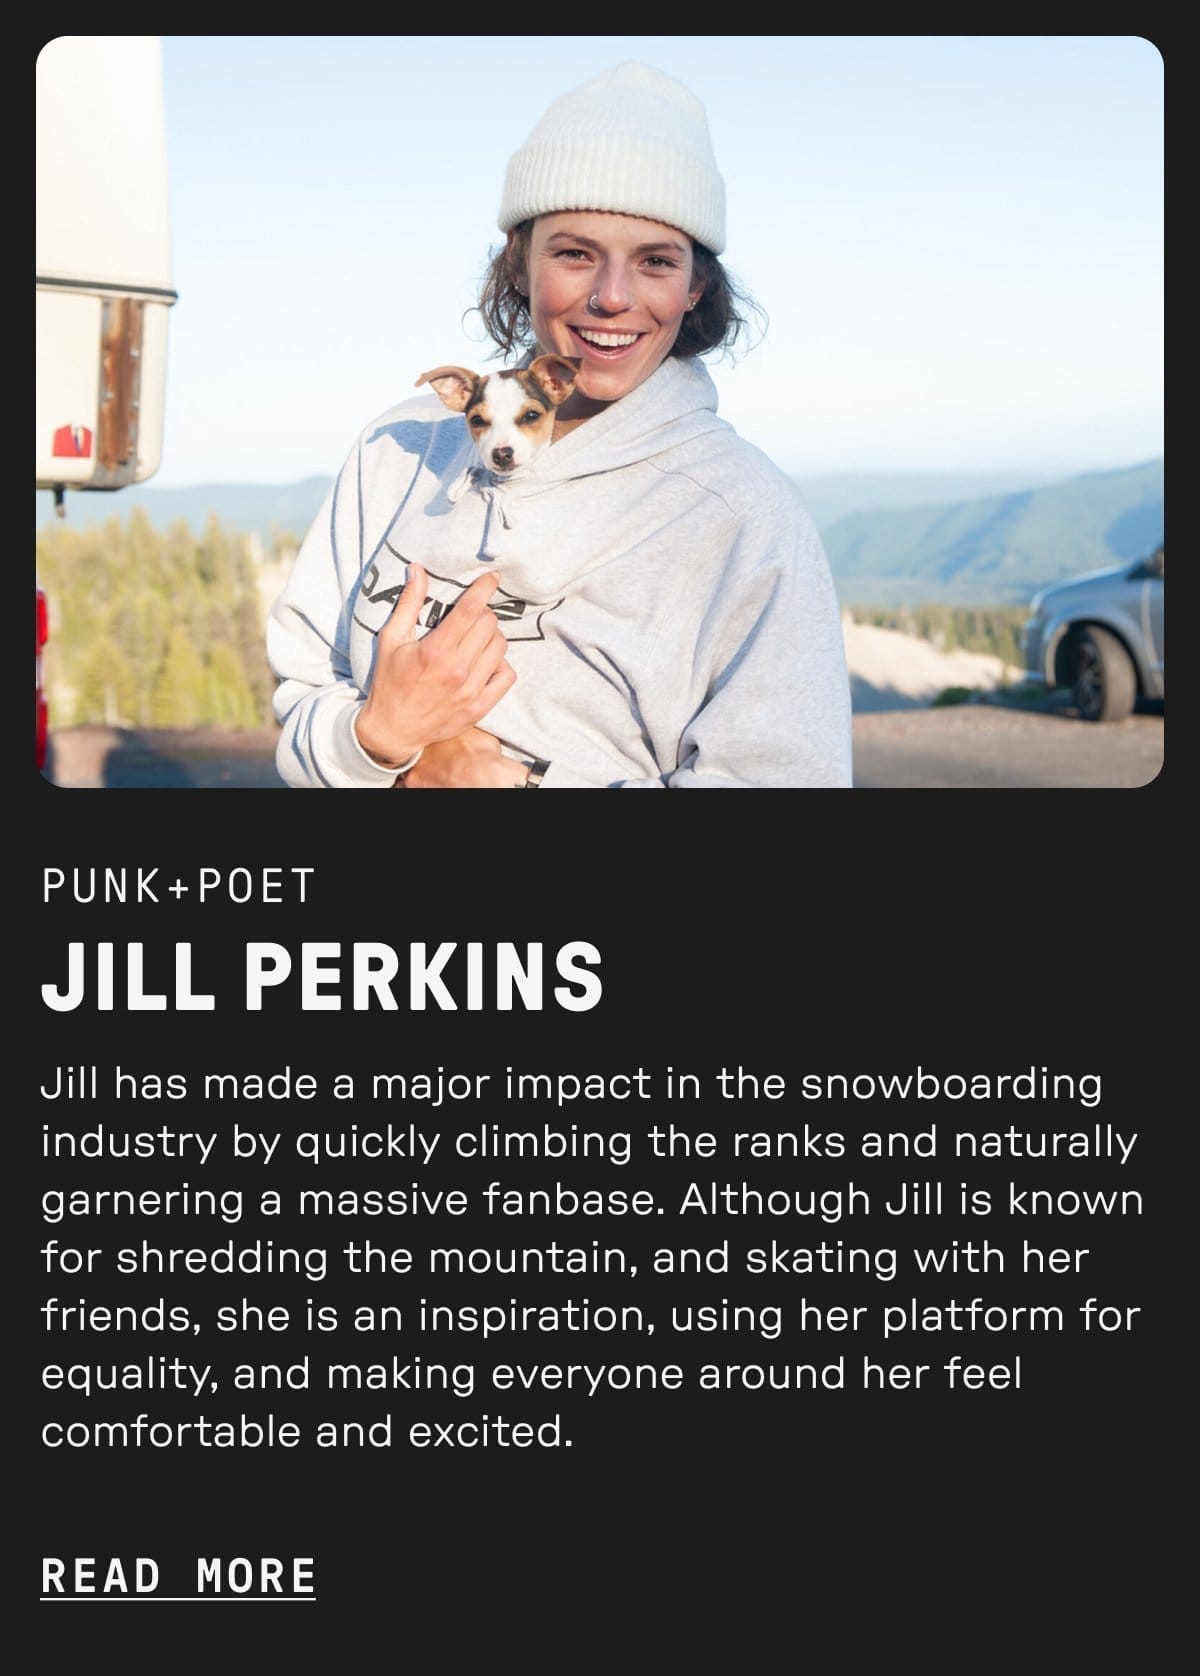 Get to know Jill Perkins